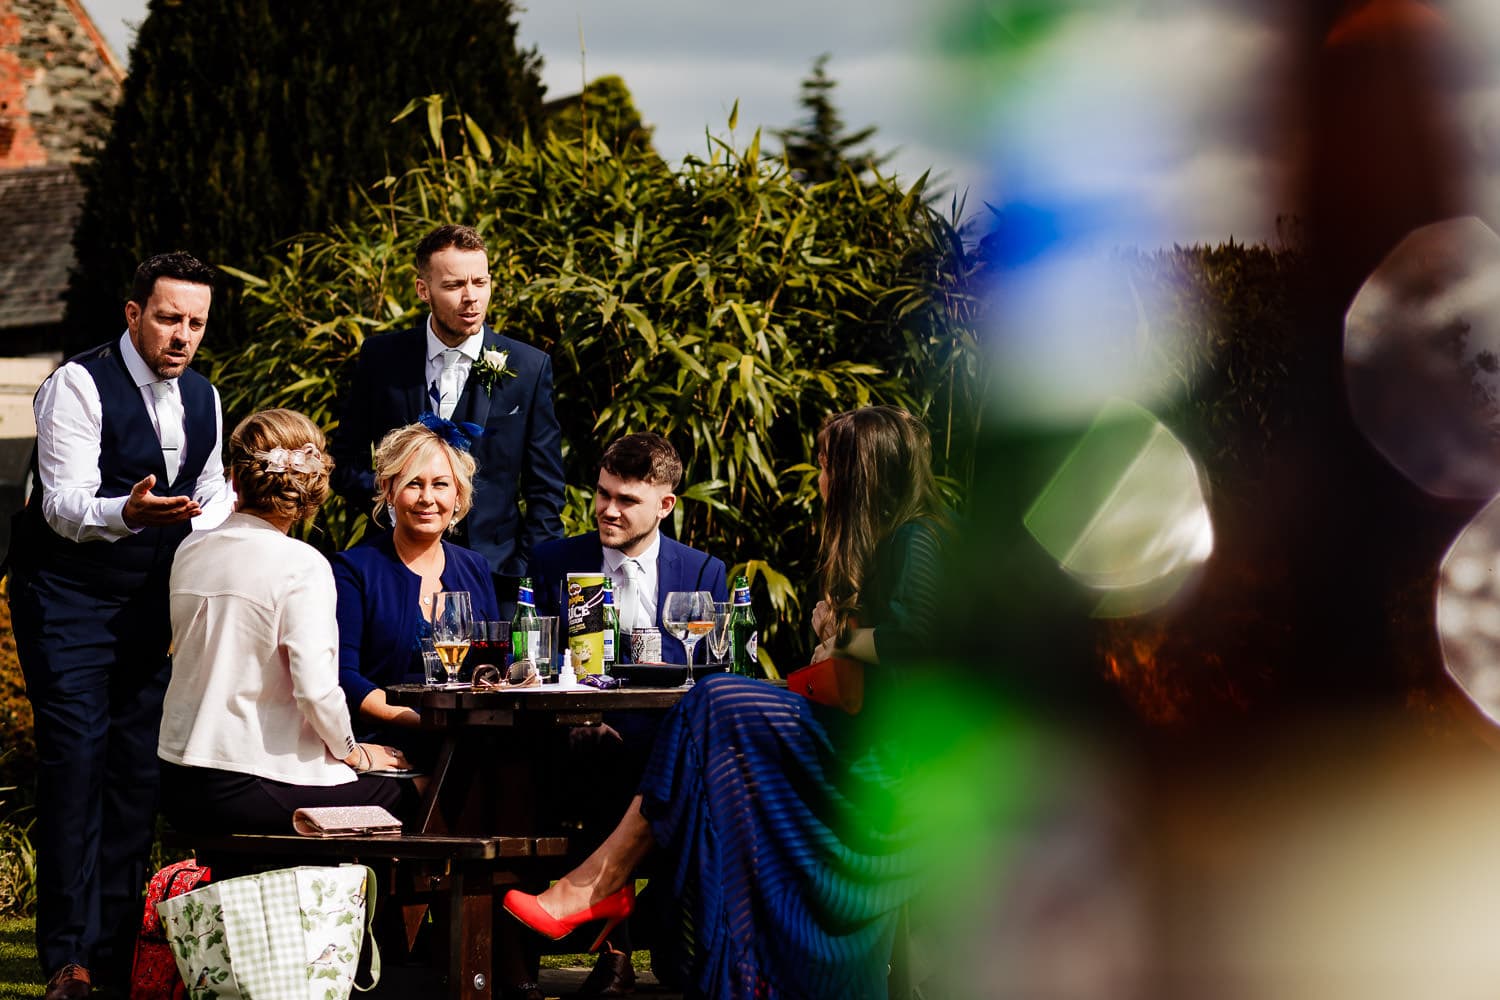 Wedding guests relax in the sunshine during amazing Leicestershire wedding reception